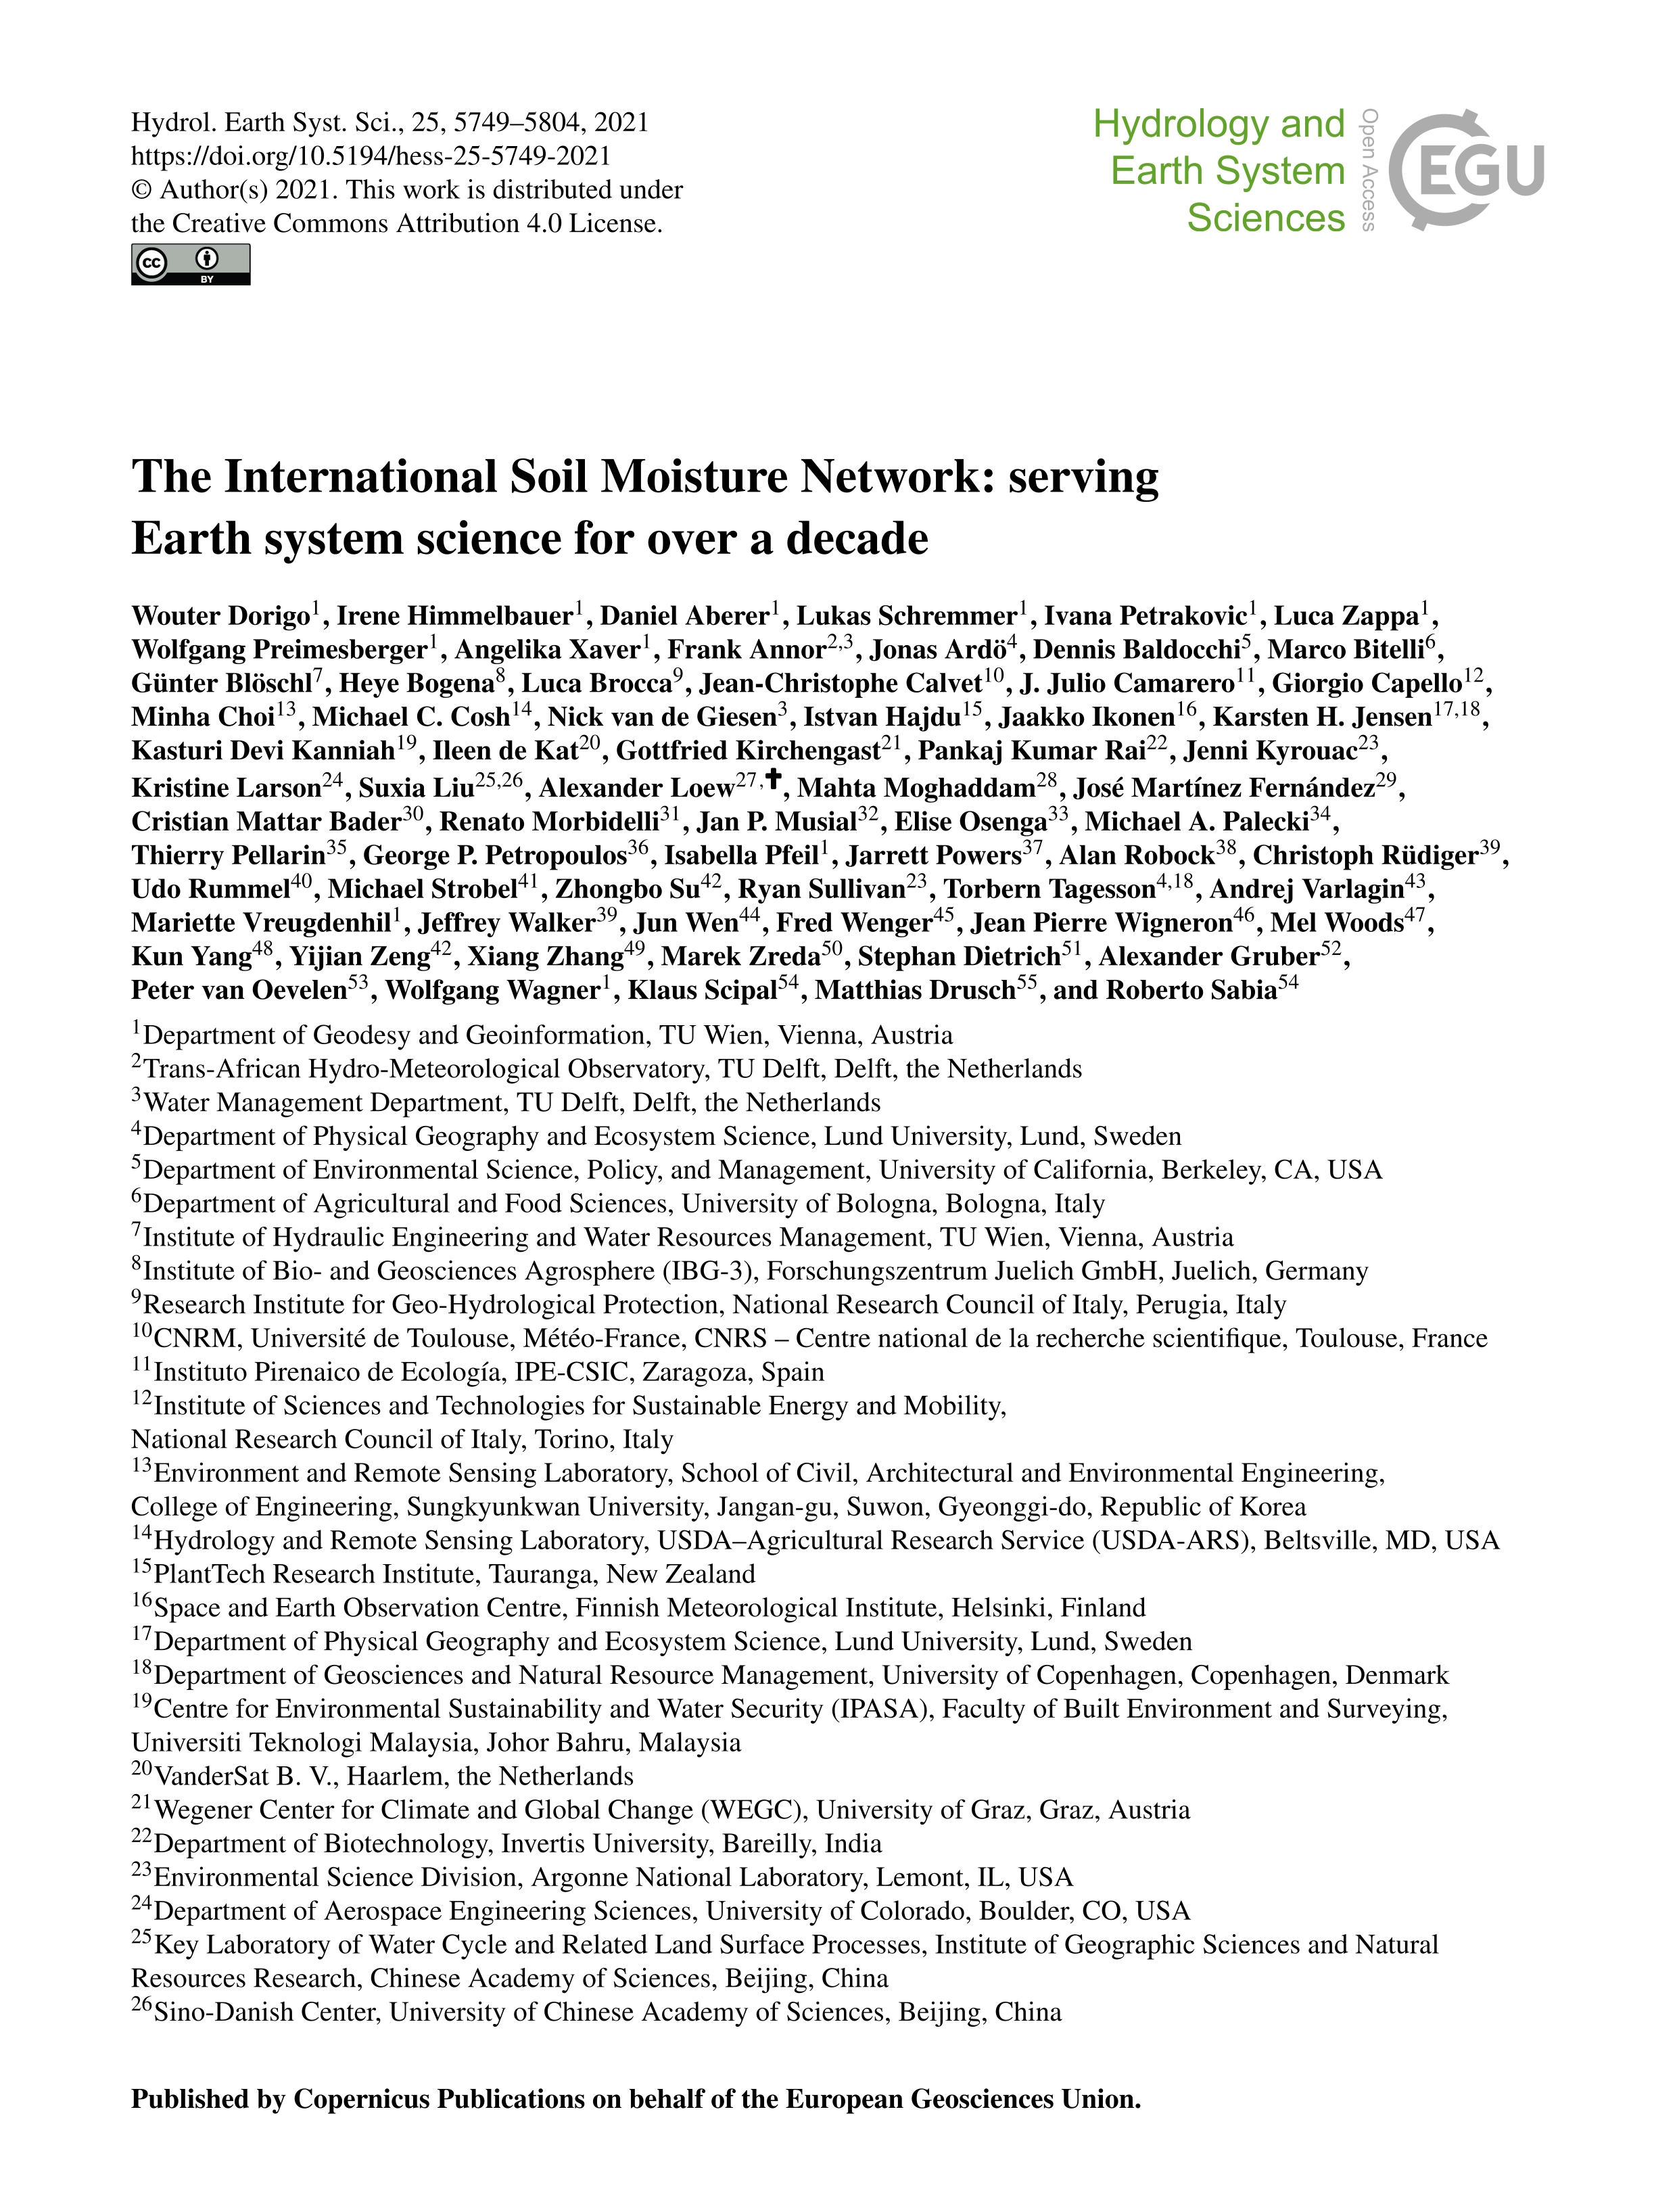 The international soil moisture network: serving earth system science for over a decade